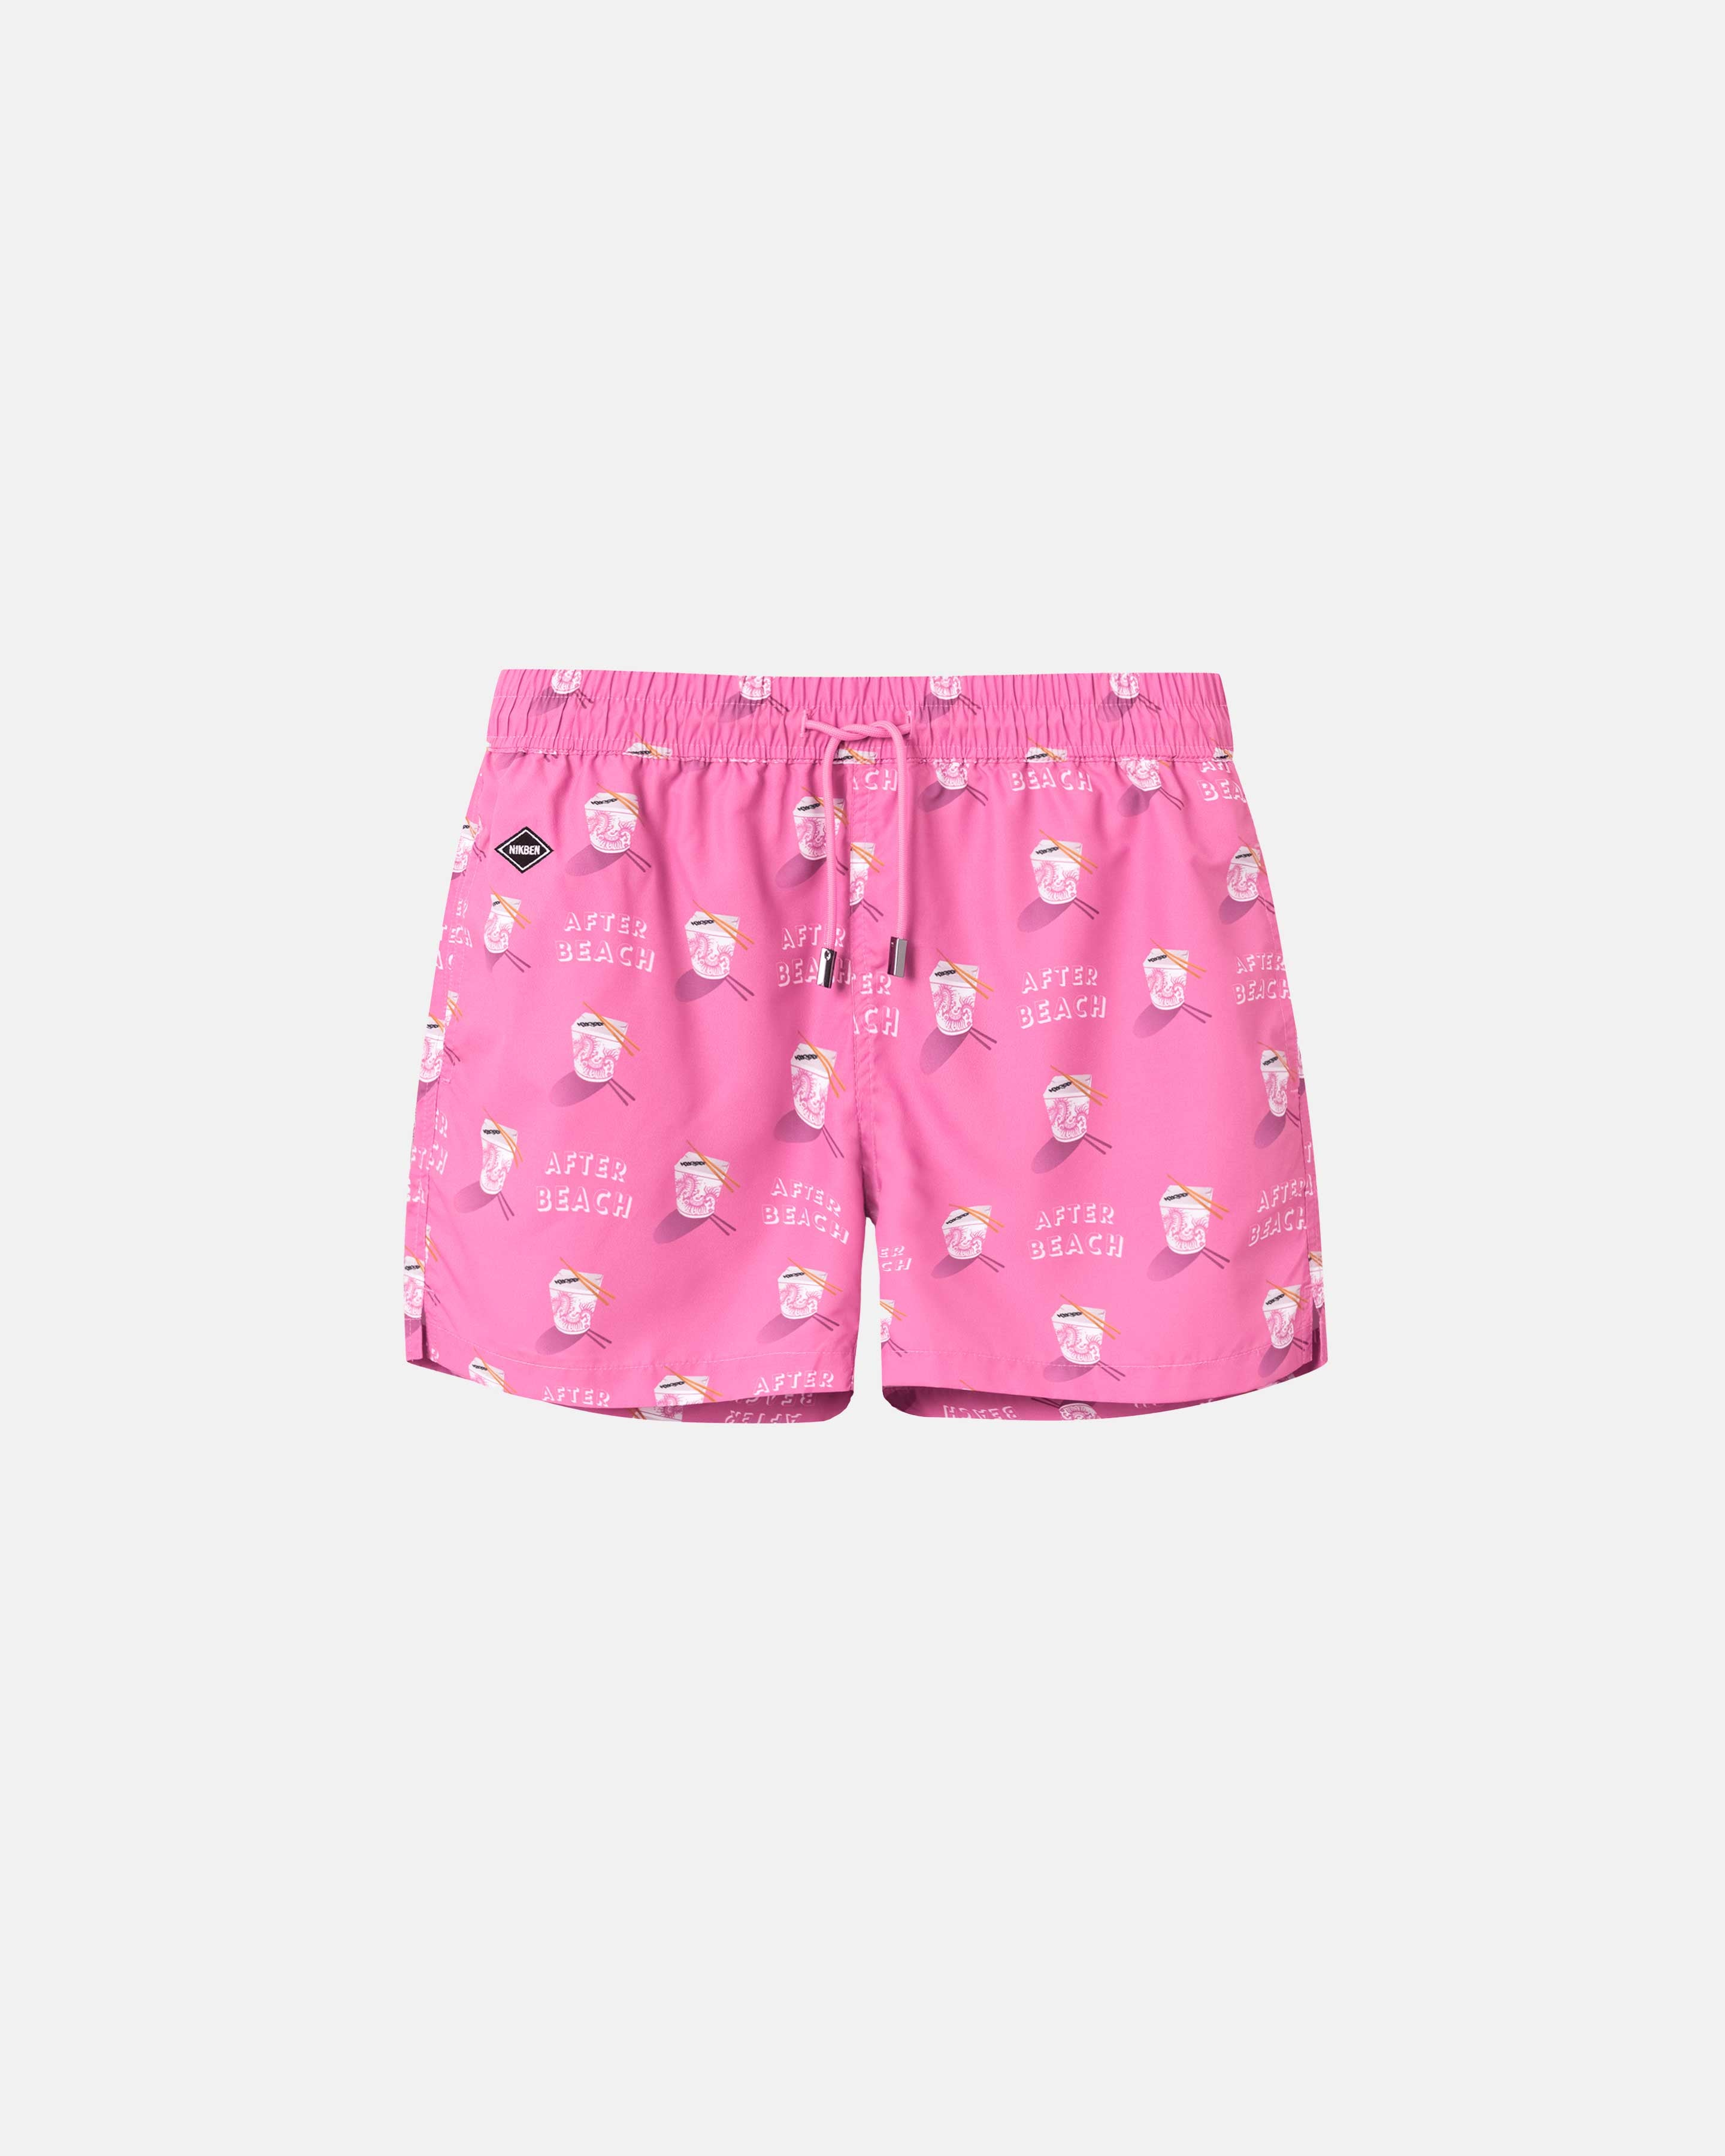 Pink pinted swim trunks. Mid length shorts with drawstring waistband and two side pockets.